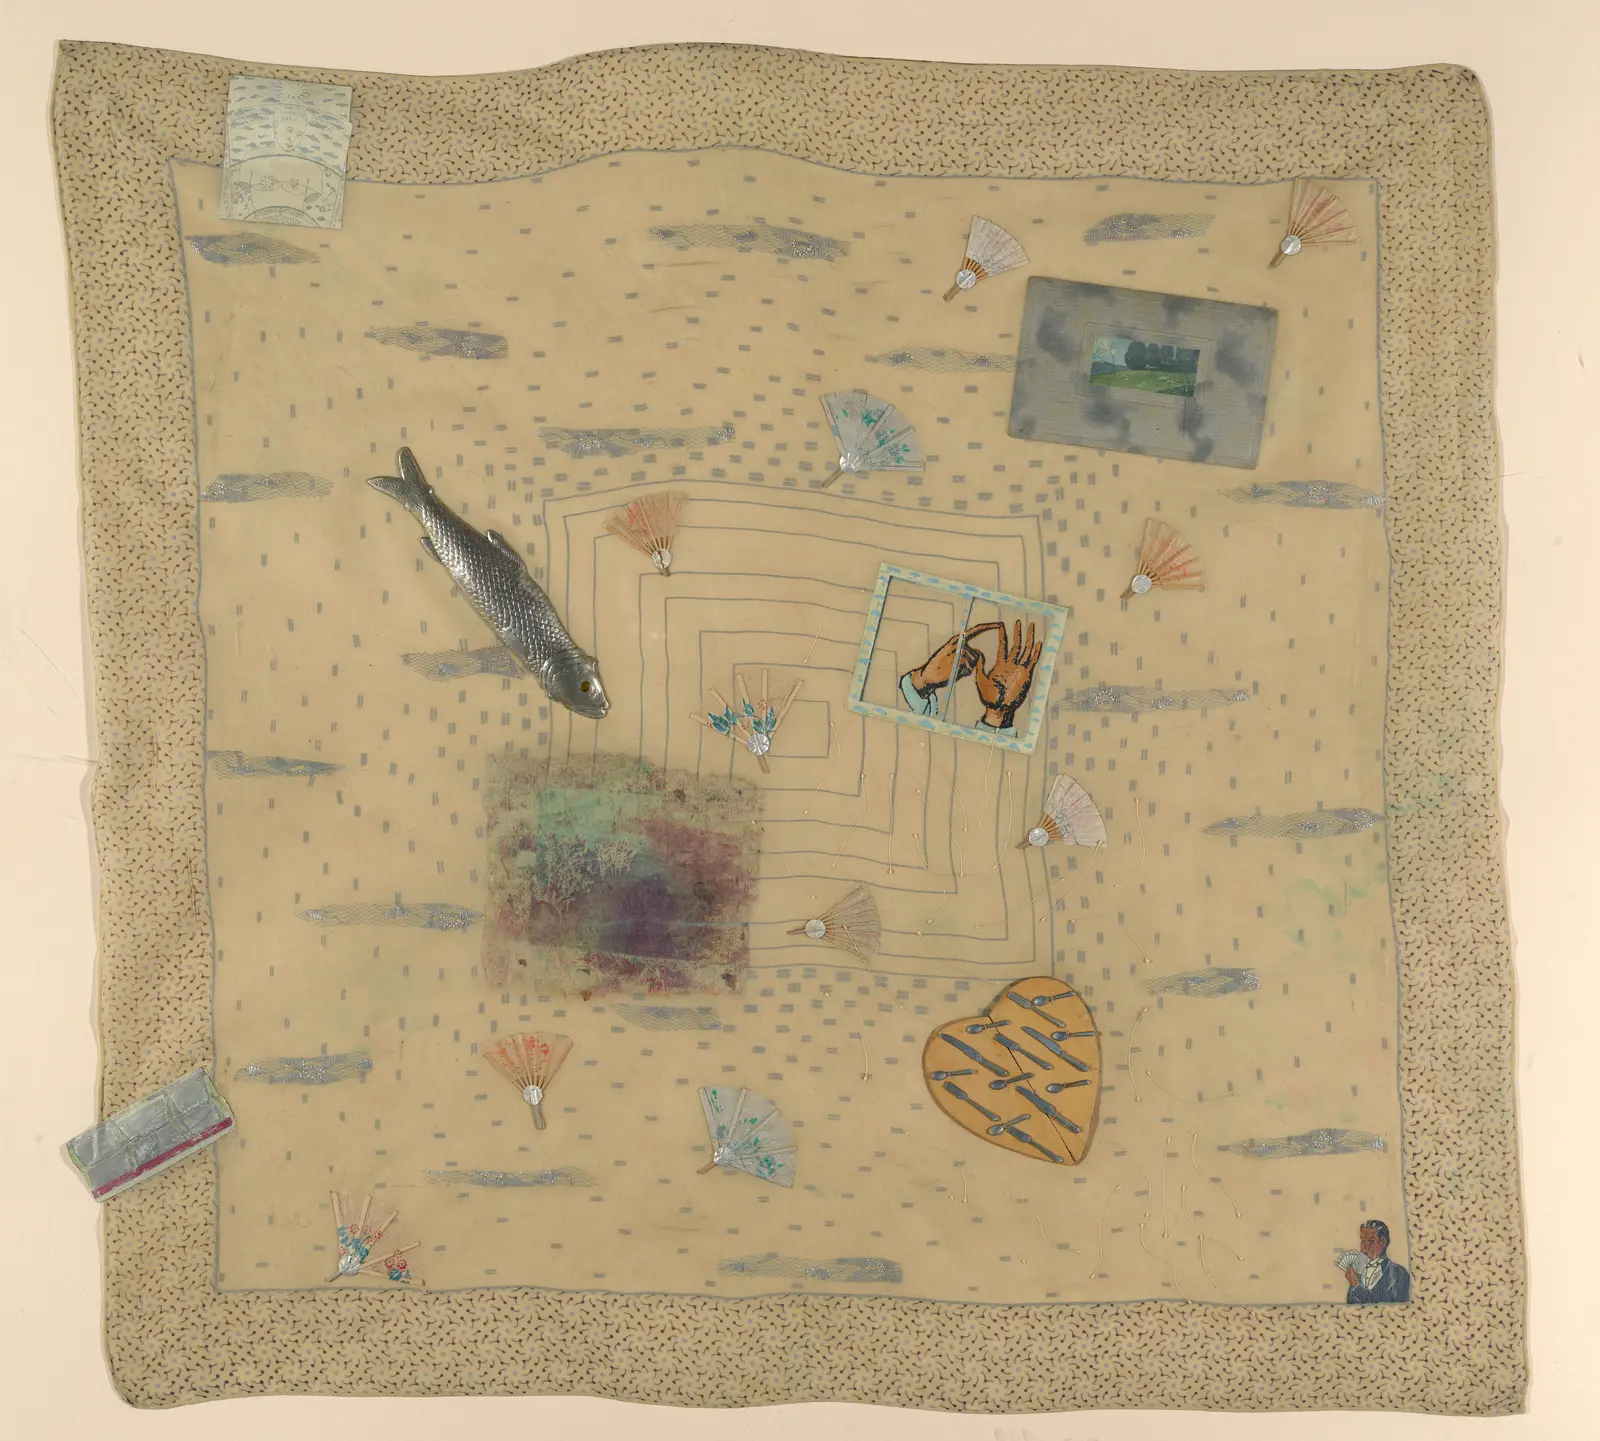 mixed media assemblage artwork on a beige handkerchief featuring an assortment of small items including a heart filled with small metal spoons and knives, small hands inside a window, small fans, a fish, a magician, and pieces of gray blue lace.